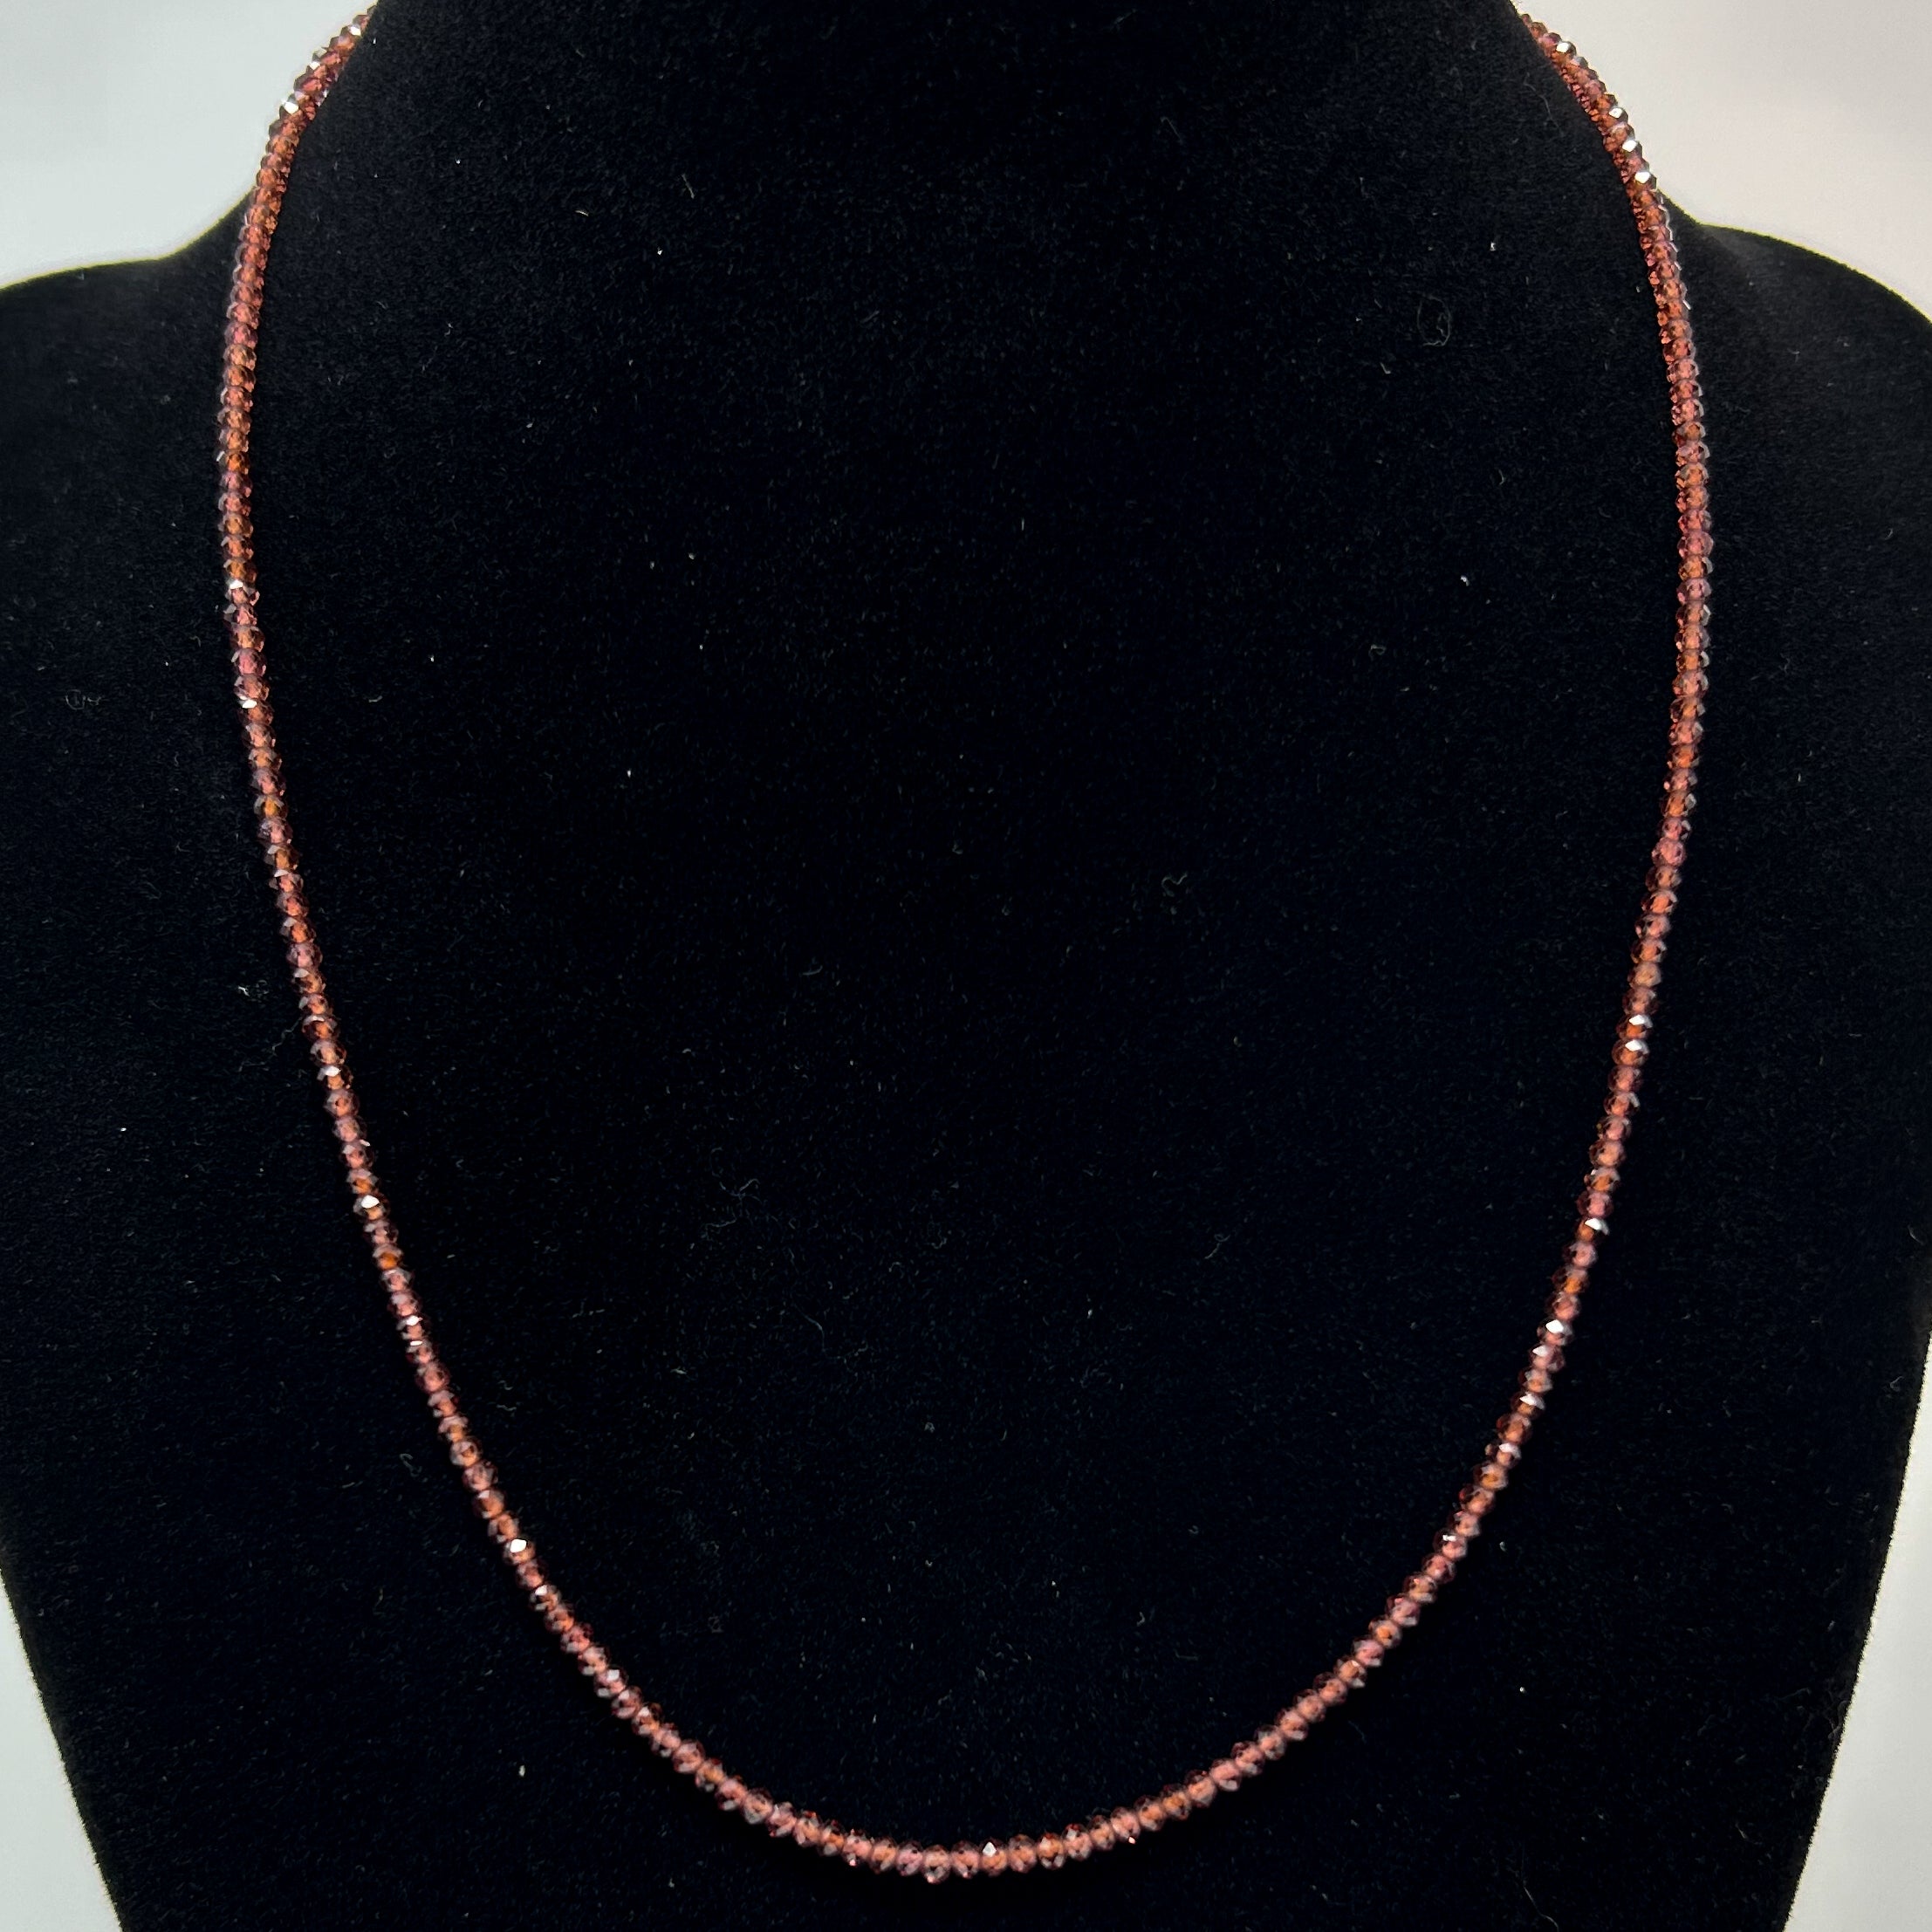 Small Faceted Gemstone Beaded Necklaces